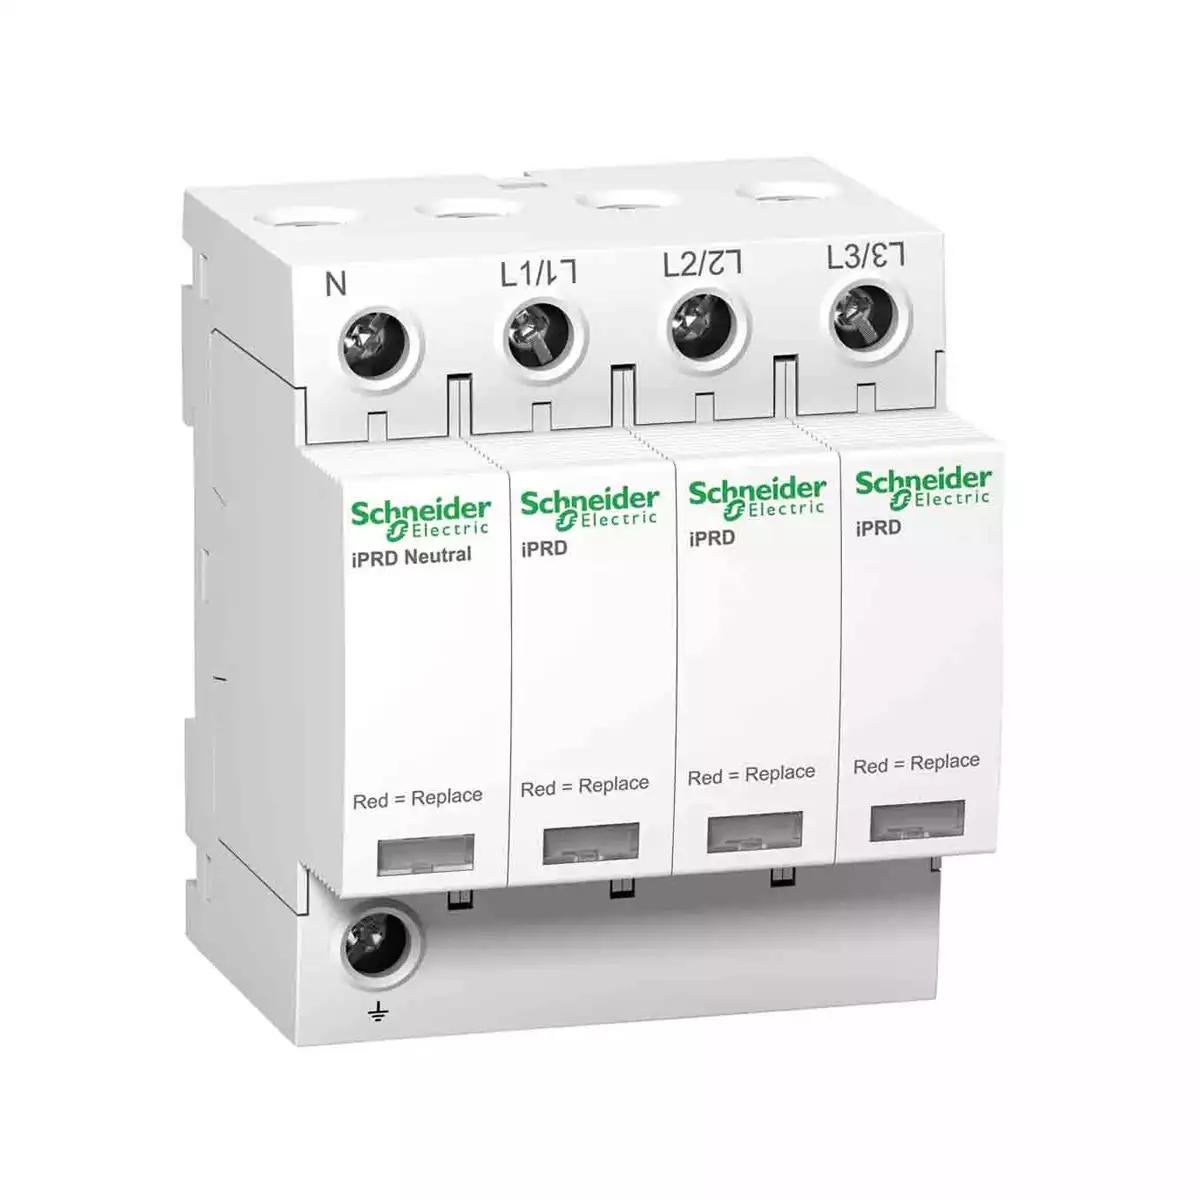 Acti9 iPRD40r Modular Surge Arrester 3P + N 350V with Remote Transfert